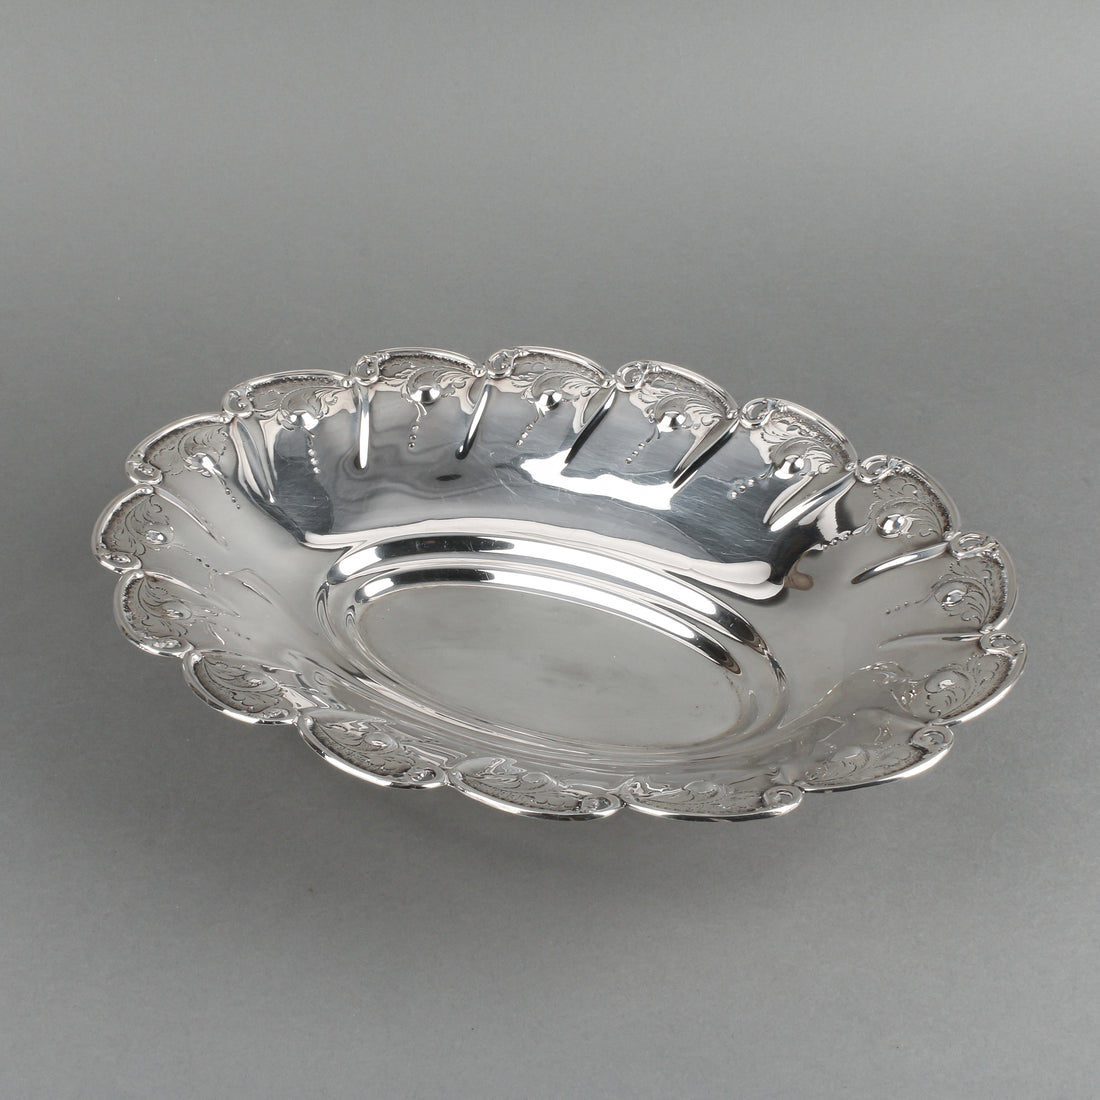 Sterling Silver Repousse & Engraved Oval Footed Bowl